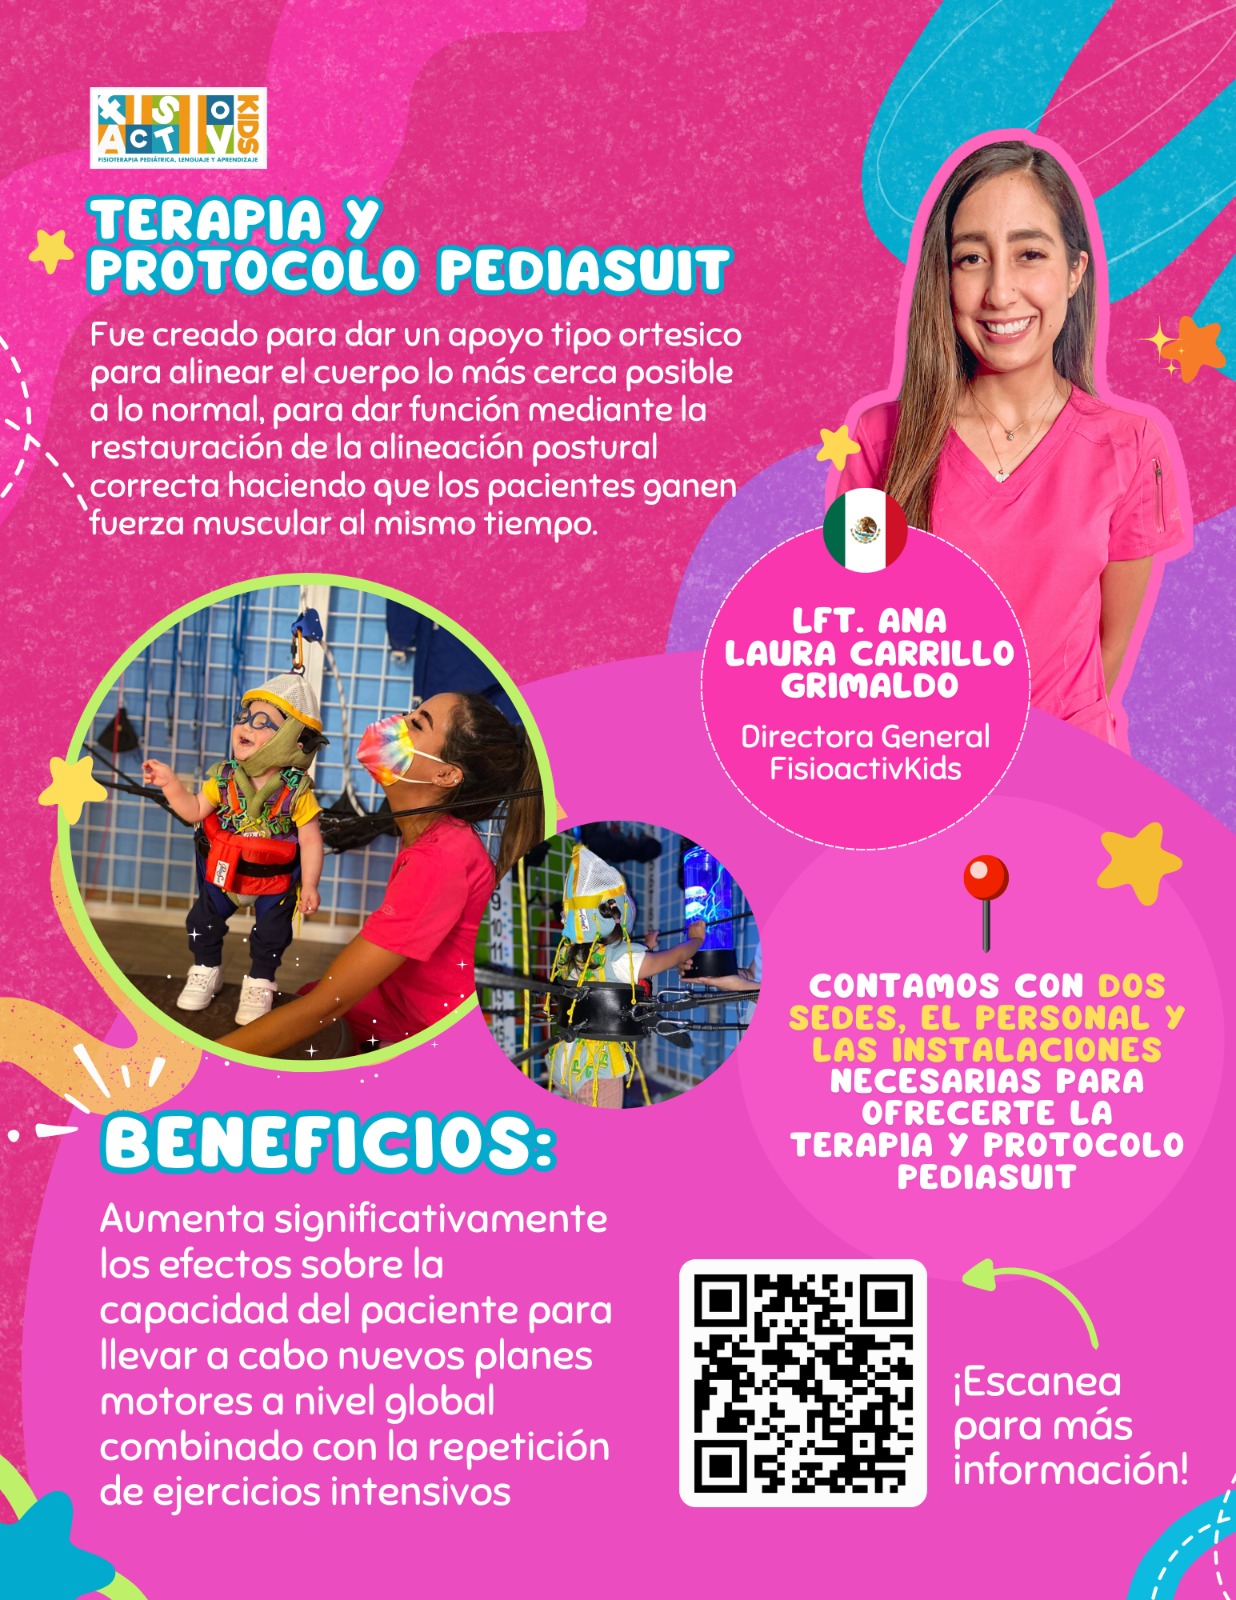 MEXICO FISIOACTIVKIDS